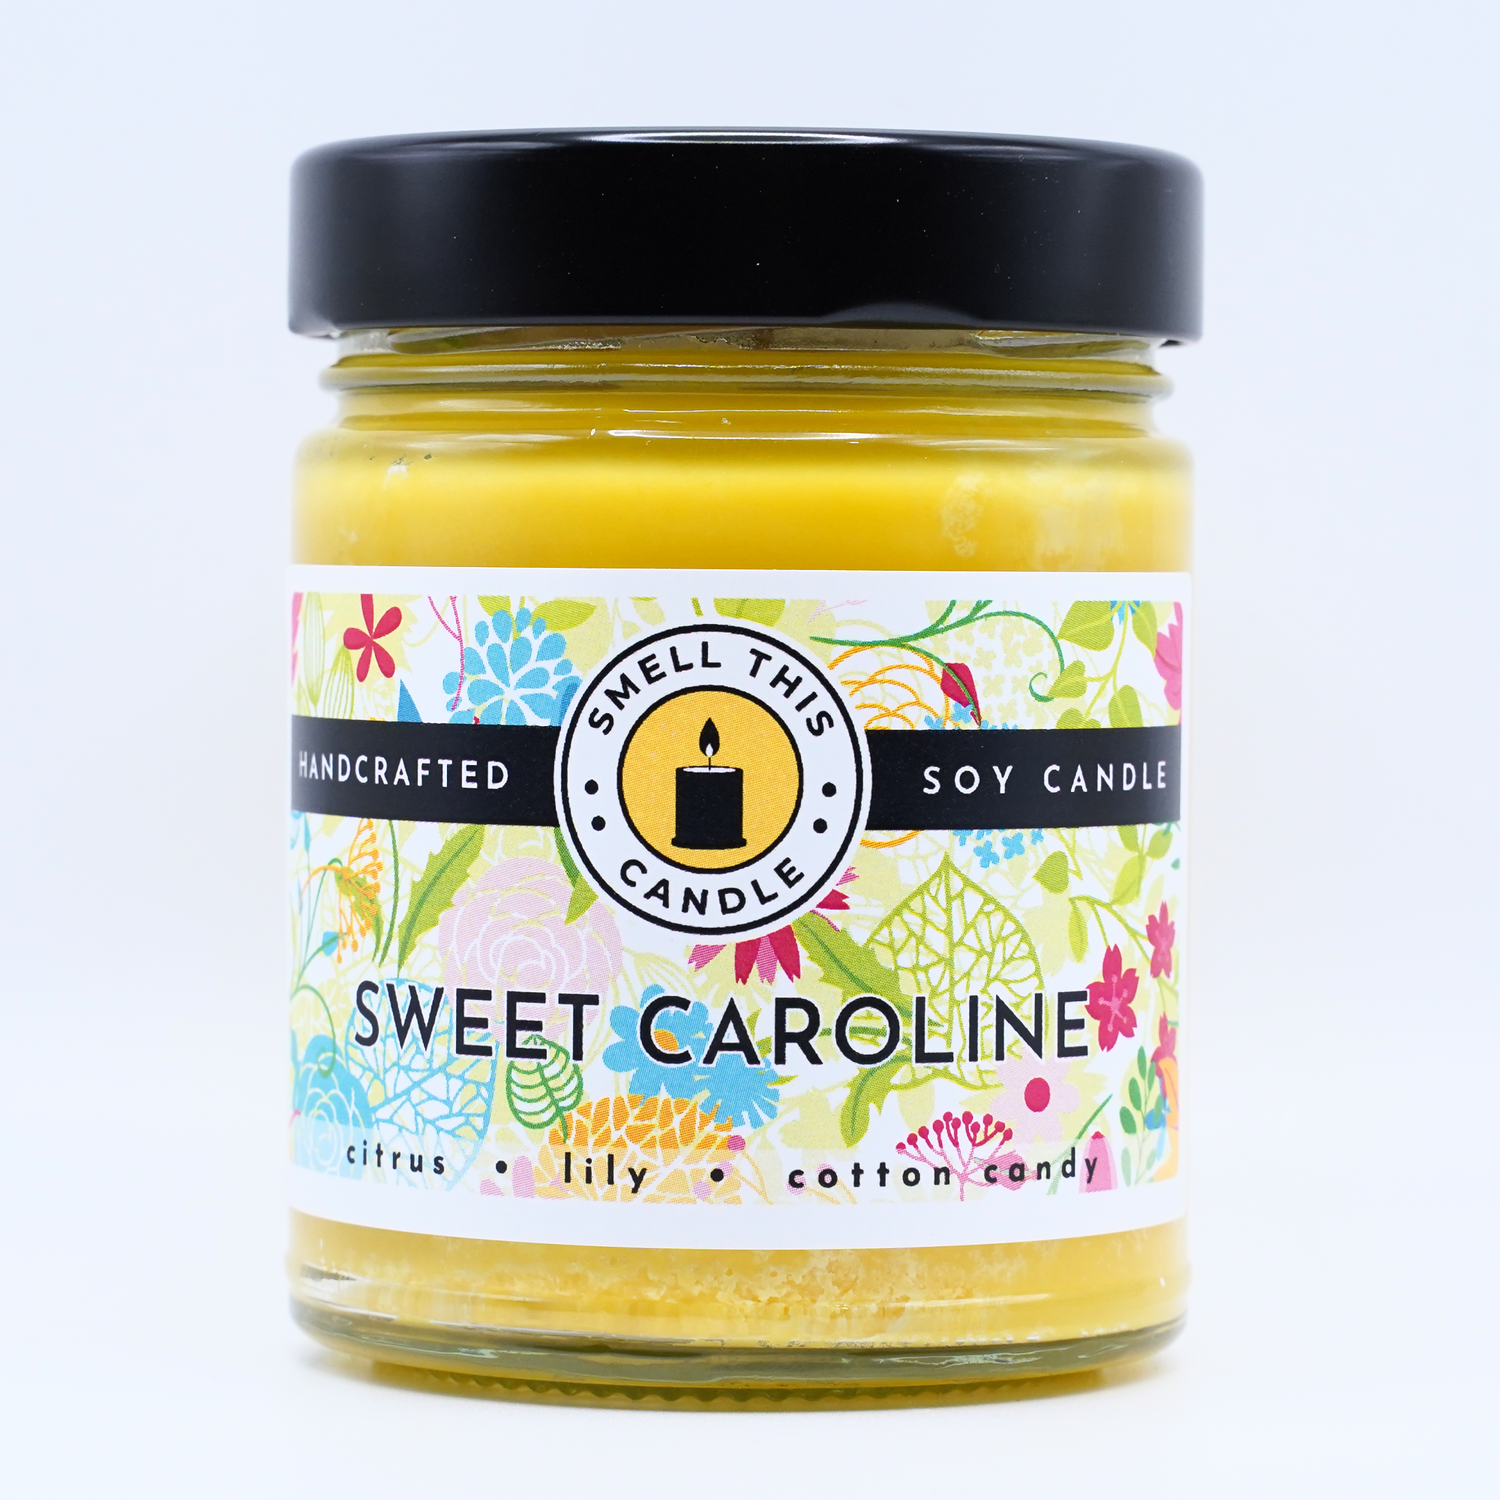 Sweet Caroline candle - Smell This Candle - Candles